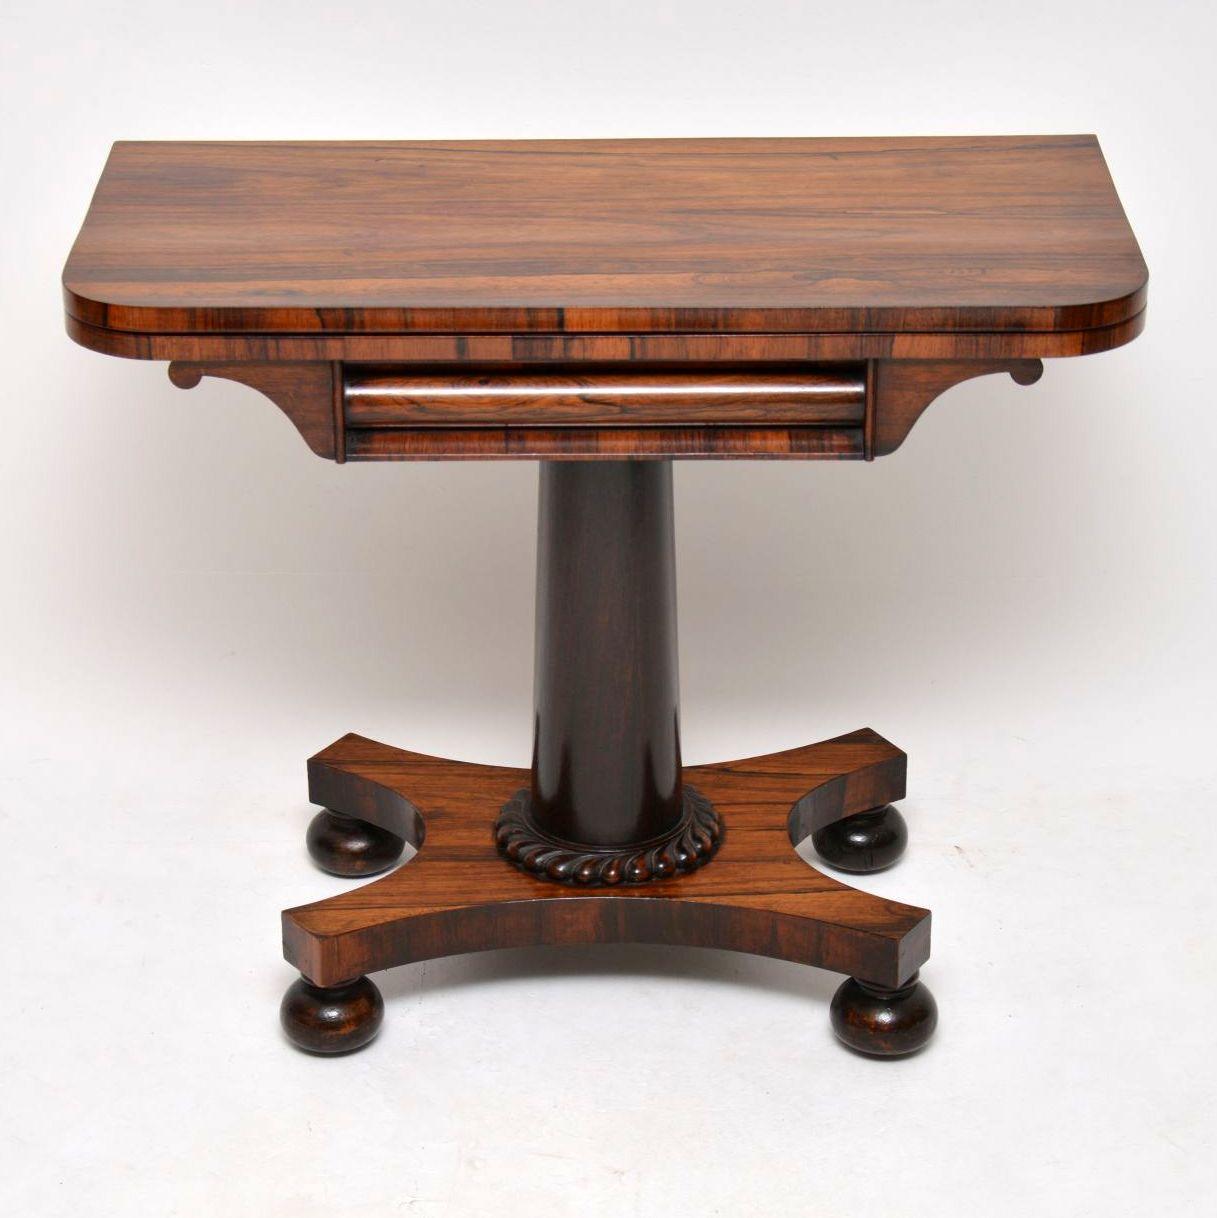 Antique William IV rosewood card table in good condition dating to circa 1830s-1840s period. The rosewood is nicely patterned all-over and it’s even polished on the back. The table top swivels around and opens up to rest on frame below which also